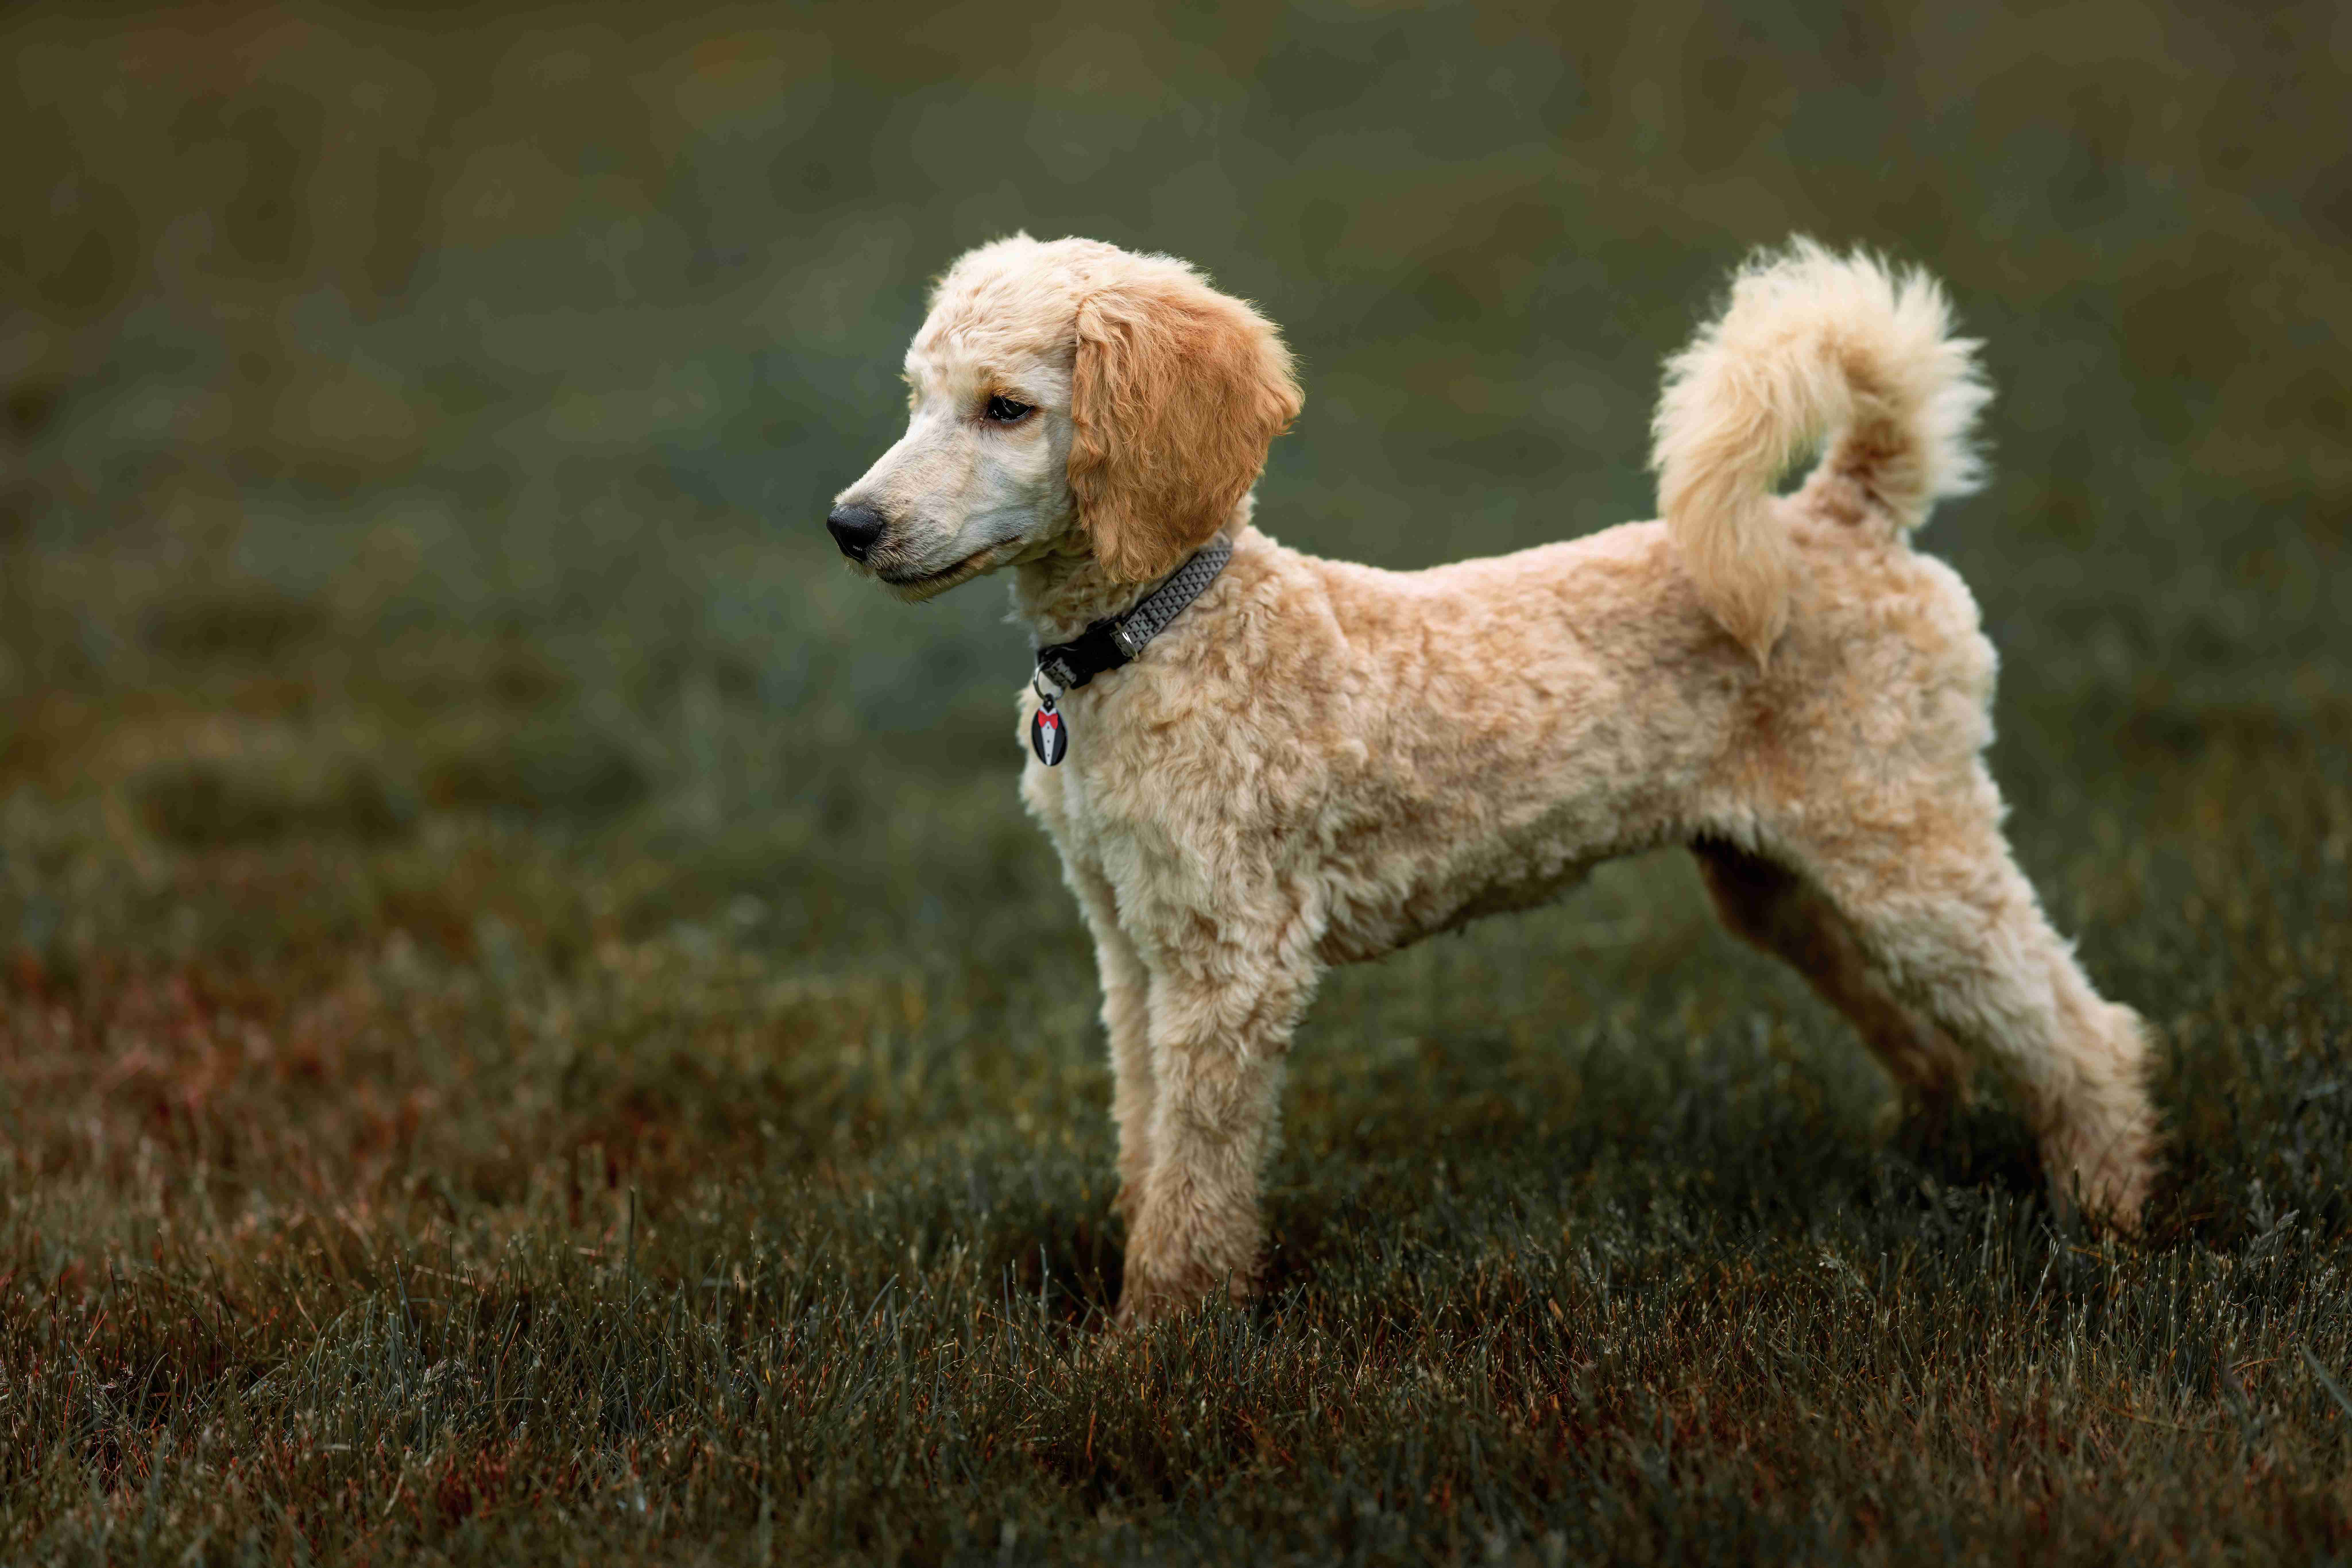 Did you encounter any challenges when crate training your Poodle puppy?